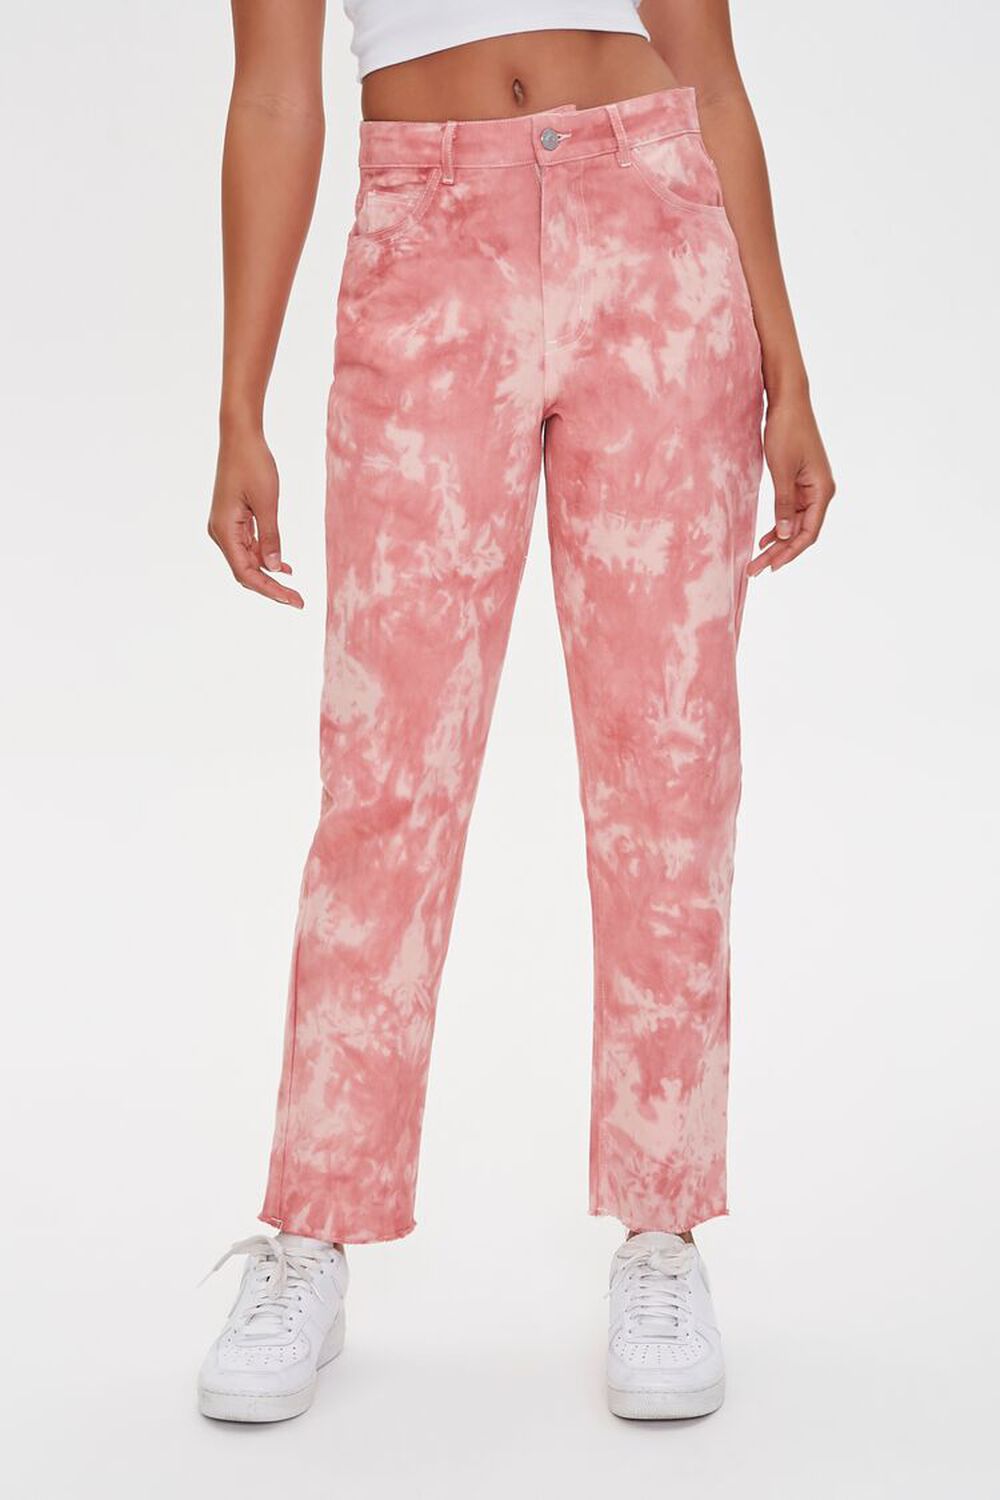 PINK/LIGHT PINK Tie-Dye Ankle Jeans, image 2